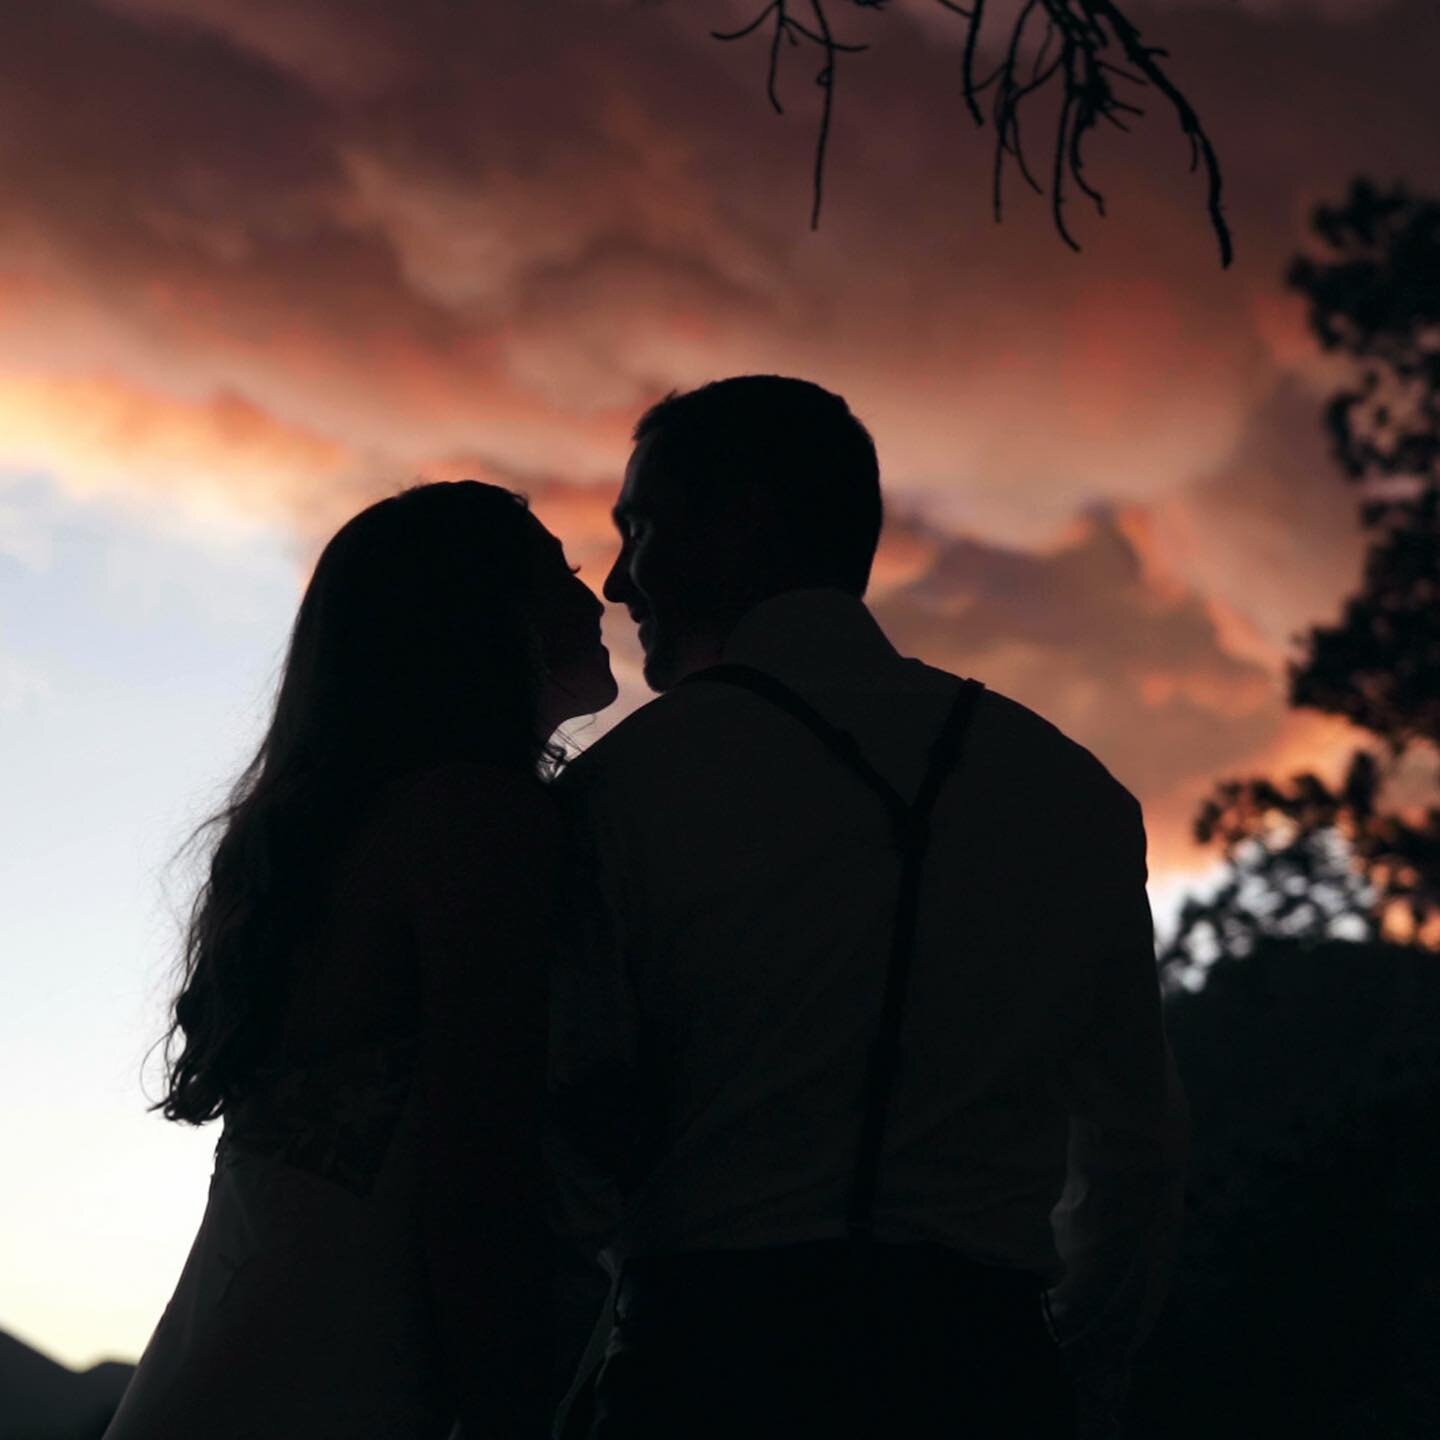 Diving in fully to edit the stunning wedding of Matt &amp; Emma, at Lost Antler Ranch outside Estes Park.  All summer long we were dealing with the fires in Colorado, in a way that felt more often than not quite scary as we looked at potential evacua